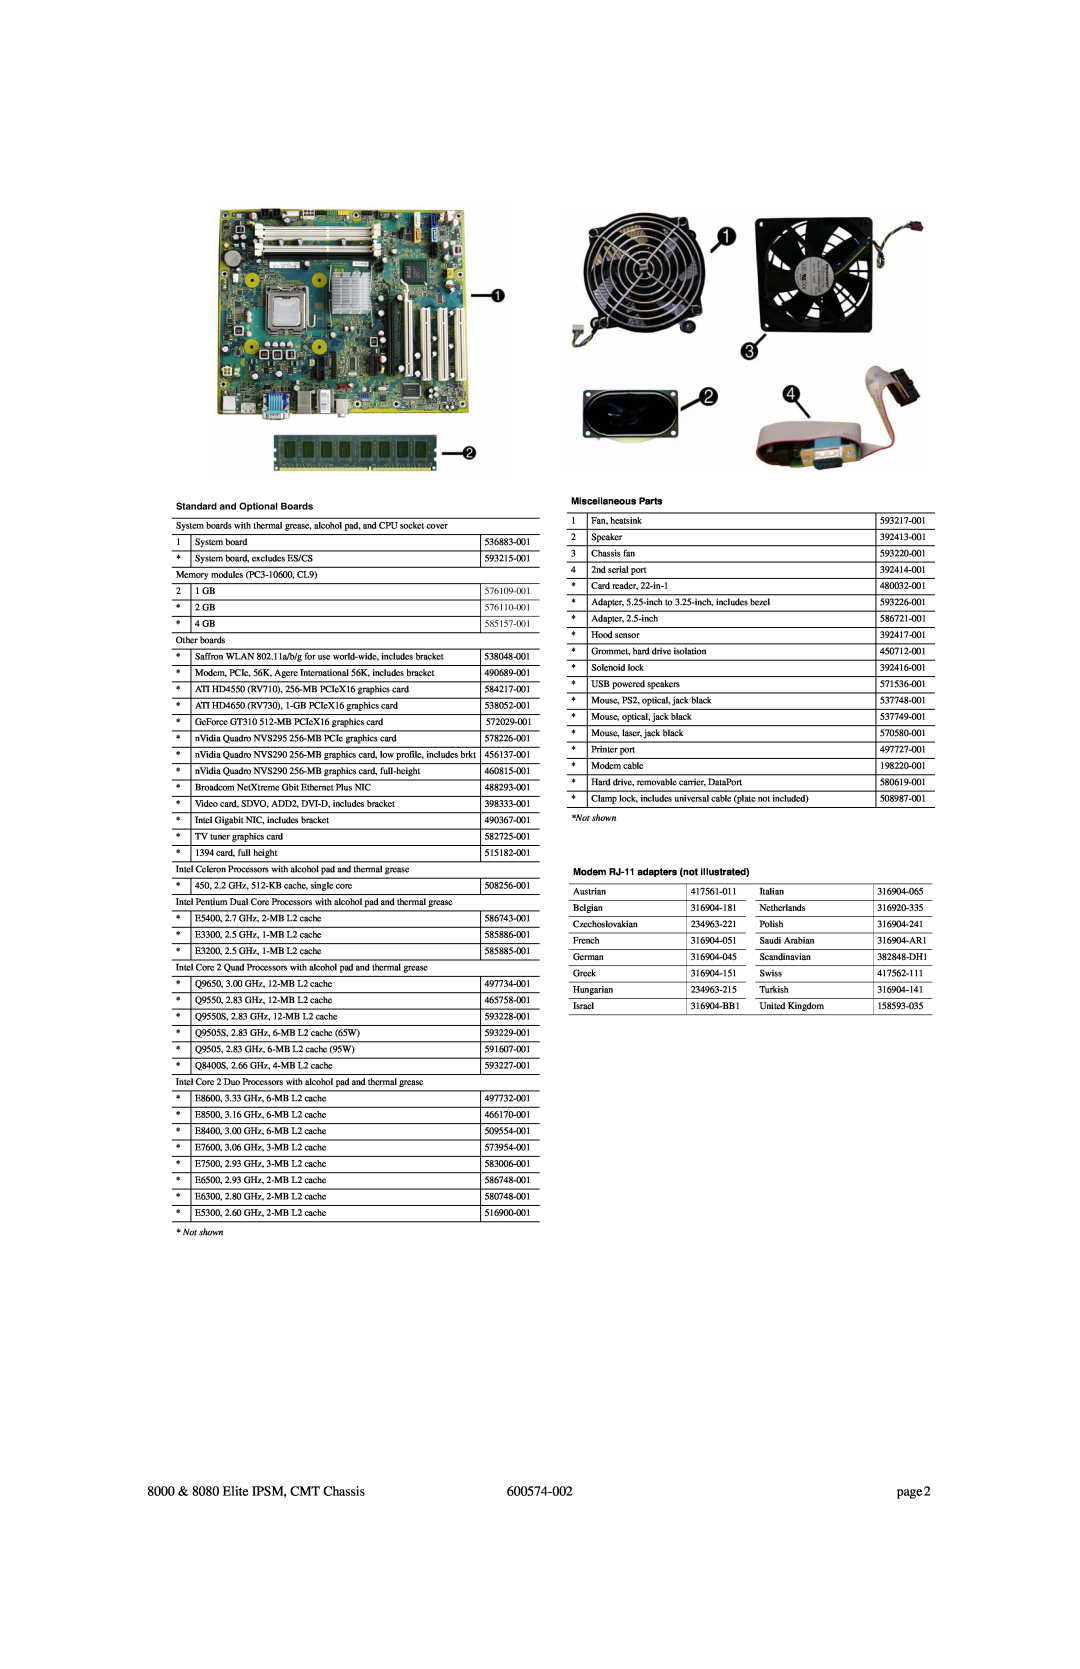 Compaq 8000 Standard and Optional Boards, Miscellaneous Parts, Modem RJ-11 adapters not illustrated, 600574-002, page 